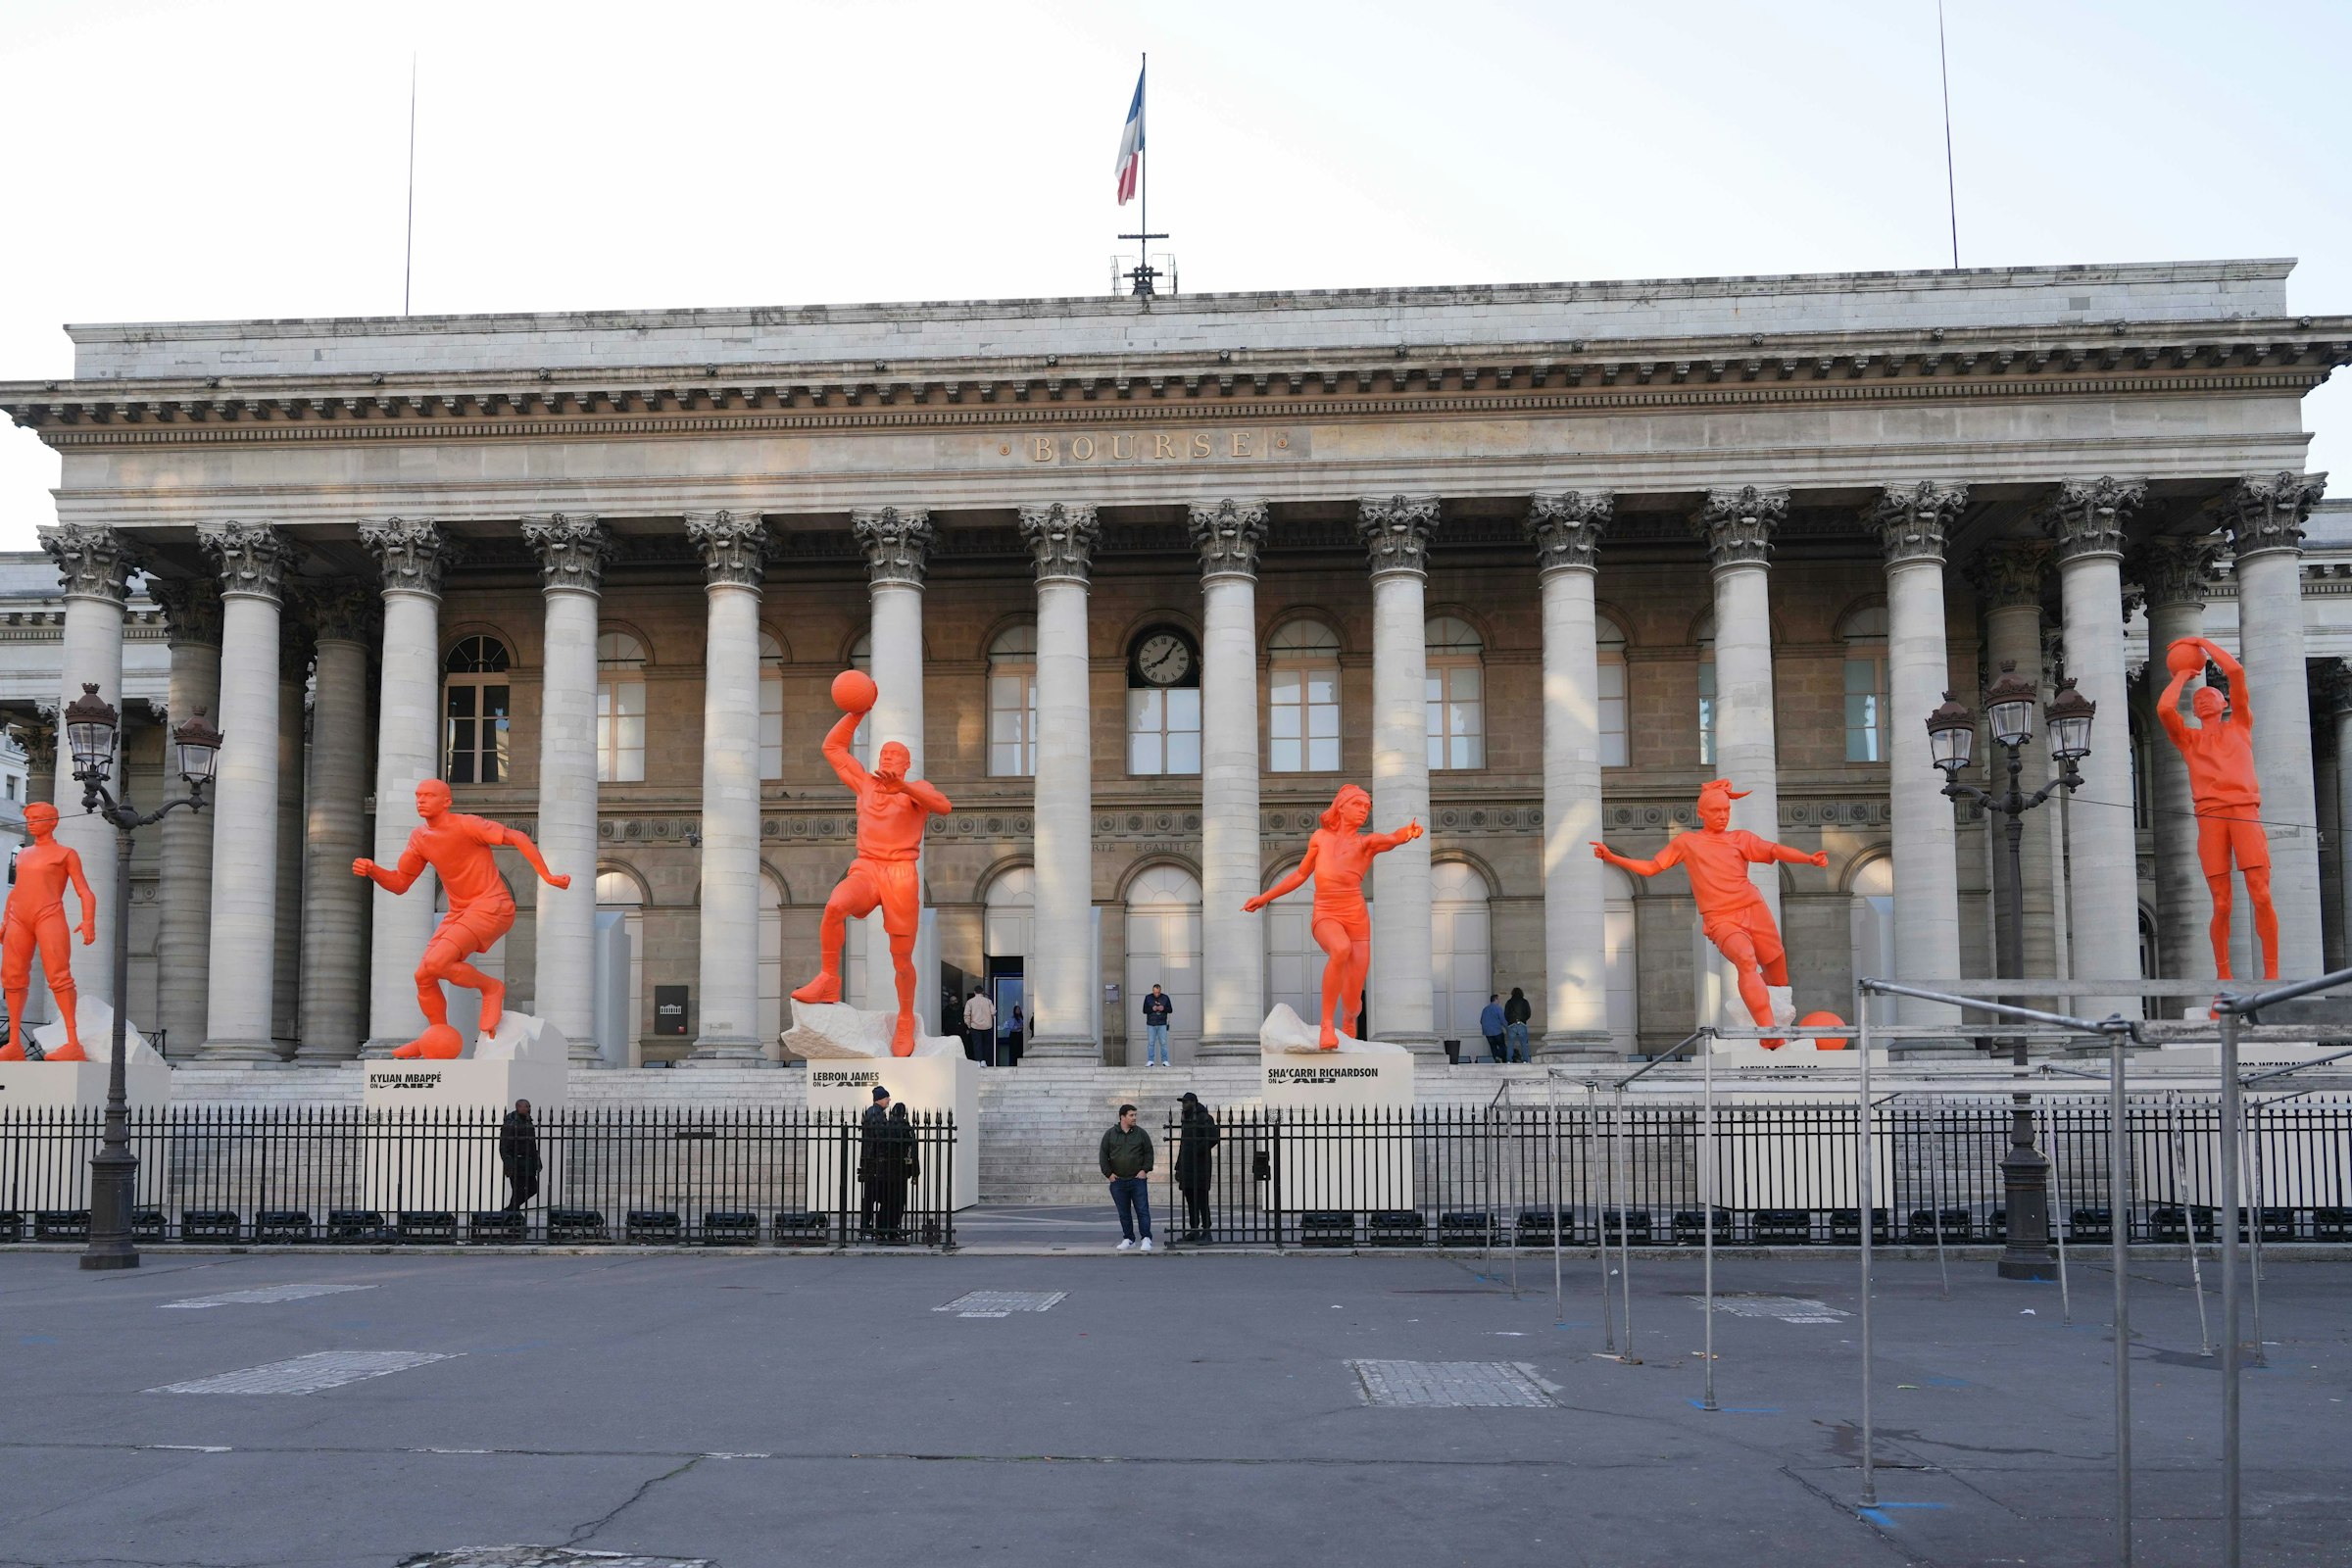 'Nike On Air' took place at the Palais de Brougniart in Paris. Statues of athletes adorned the entrance